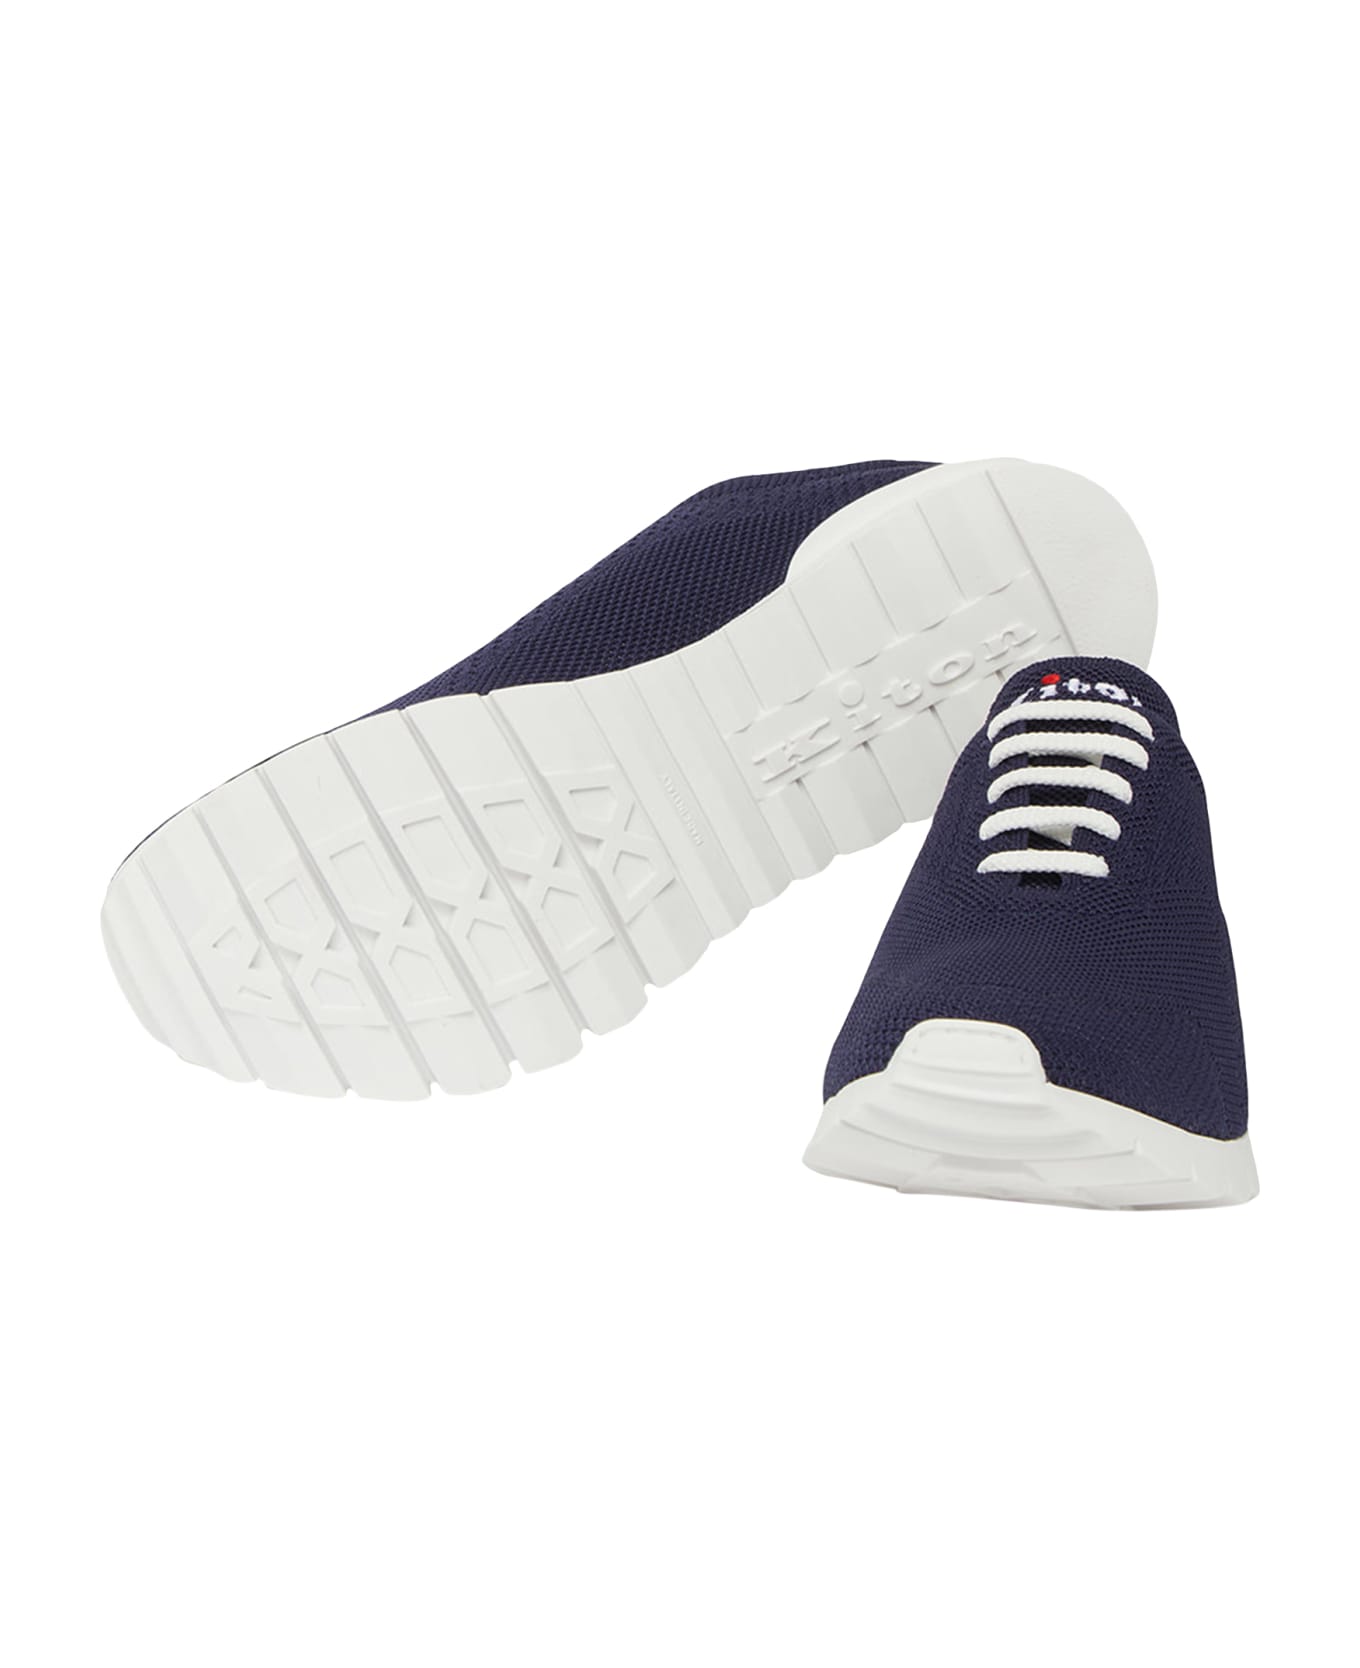 Kiton Fits - Sneakers Shoes Cotton - NAVY BLUE